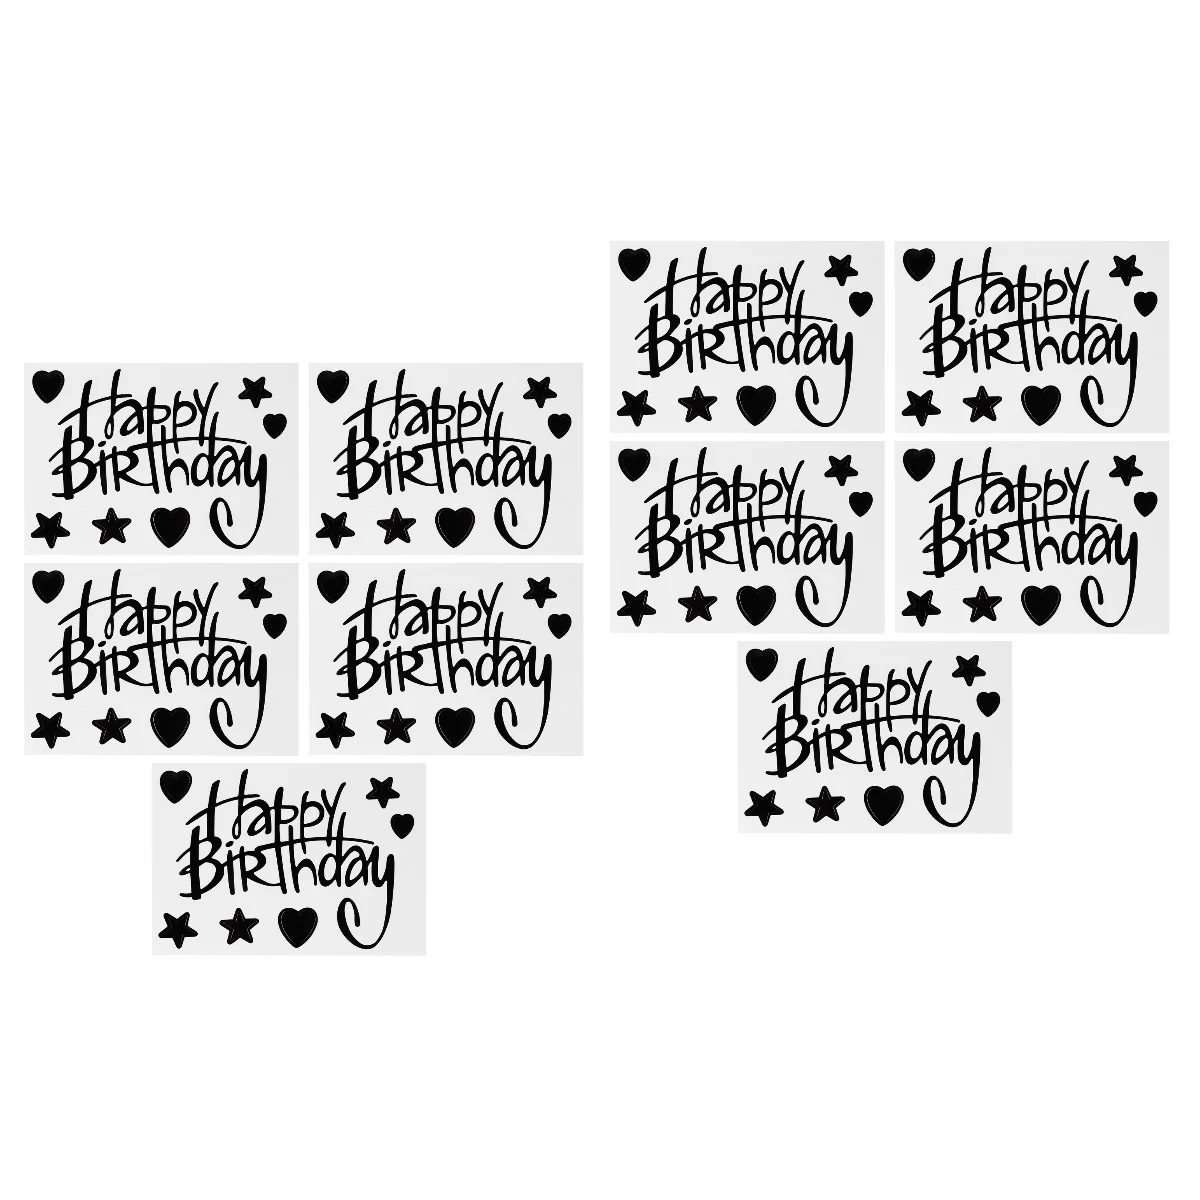 

10 Pcs Happy Birthday Stickers Decorative Balloon Letter Wall Adornment Plastic Decal Child Clear Balloons